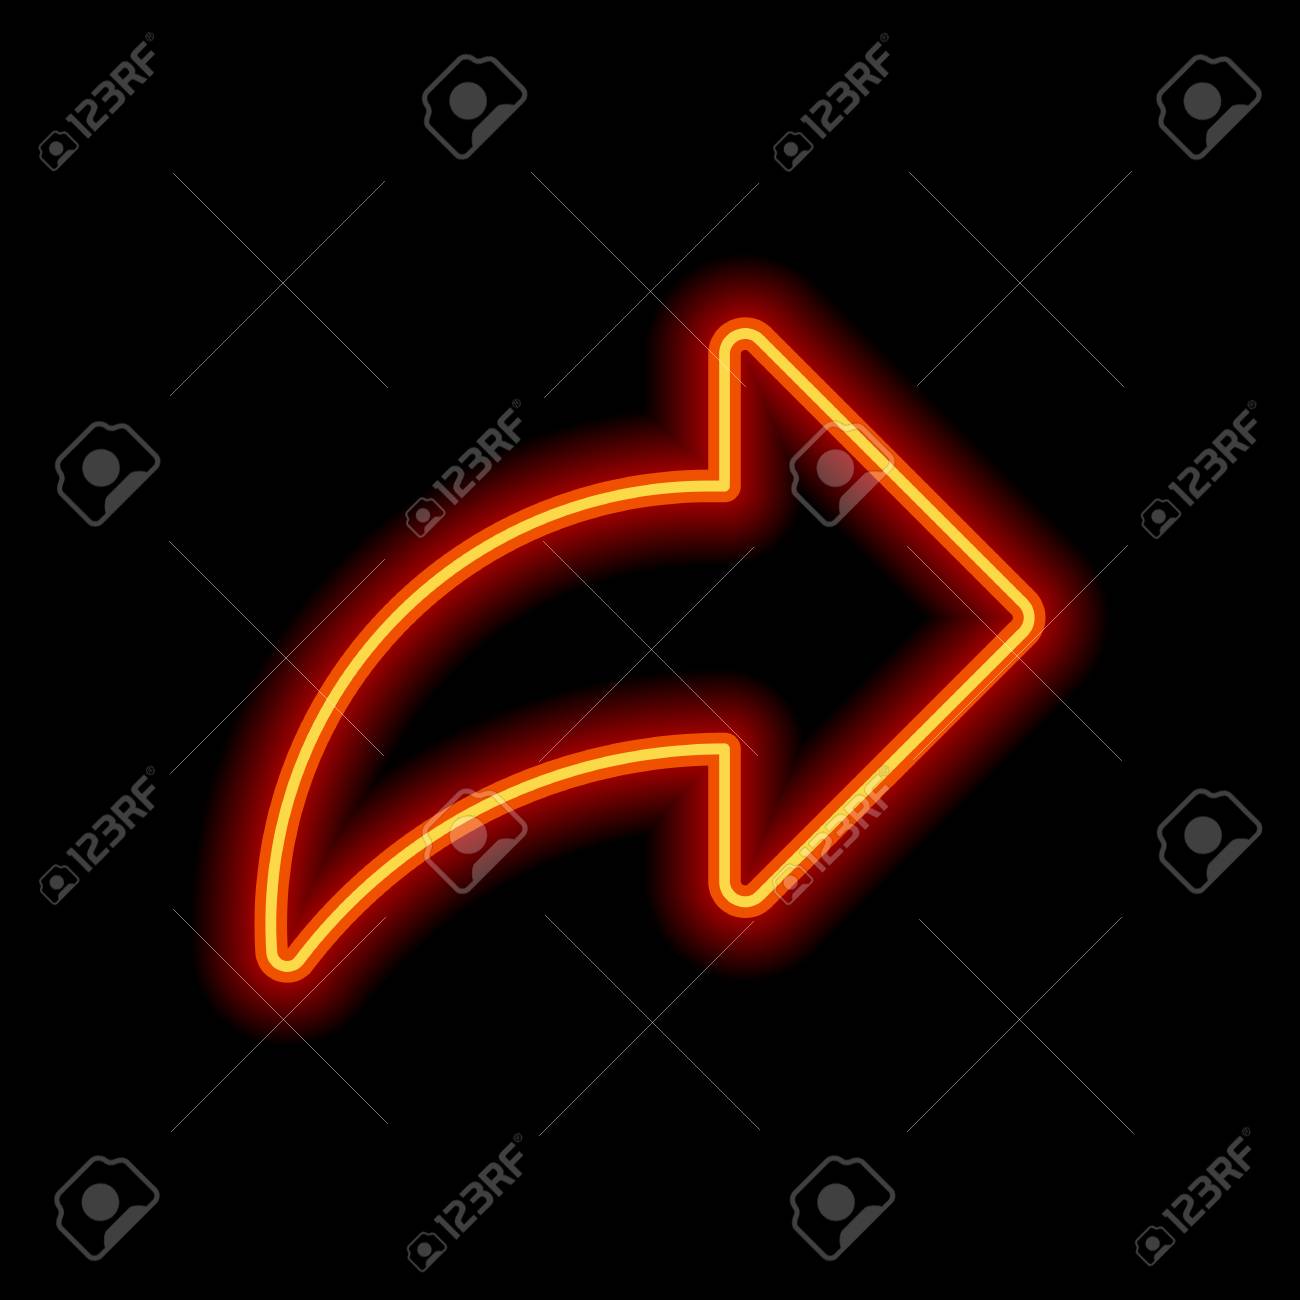 Share Icon With Arrow Orange Neon Style On Black Background